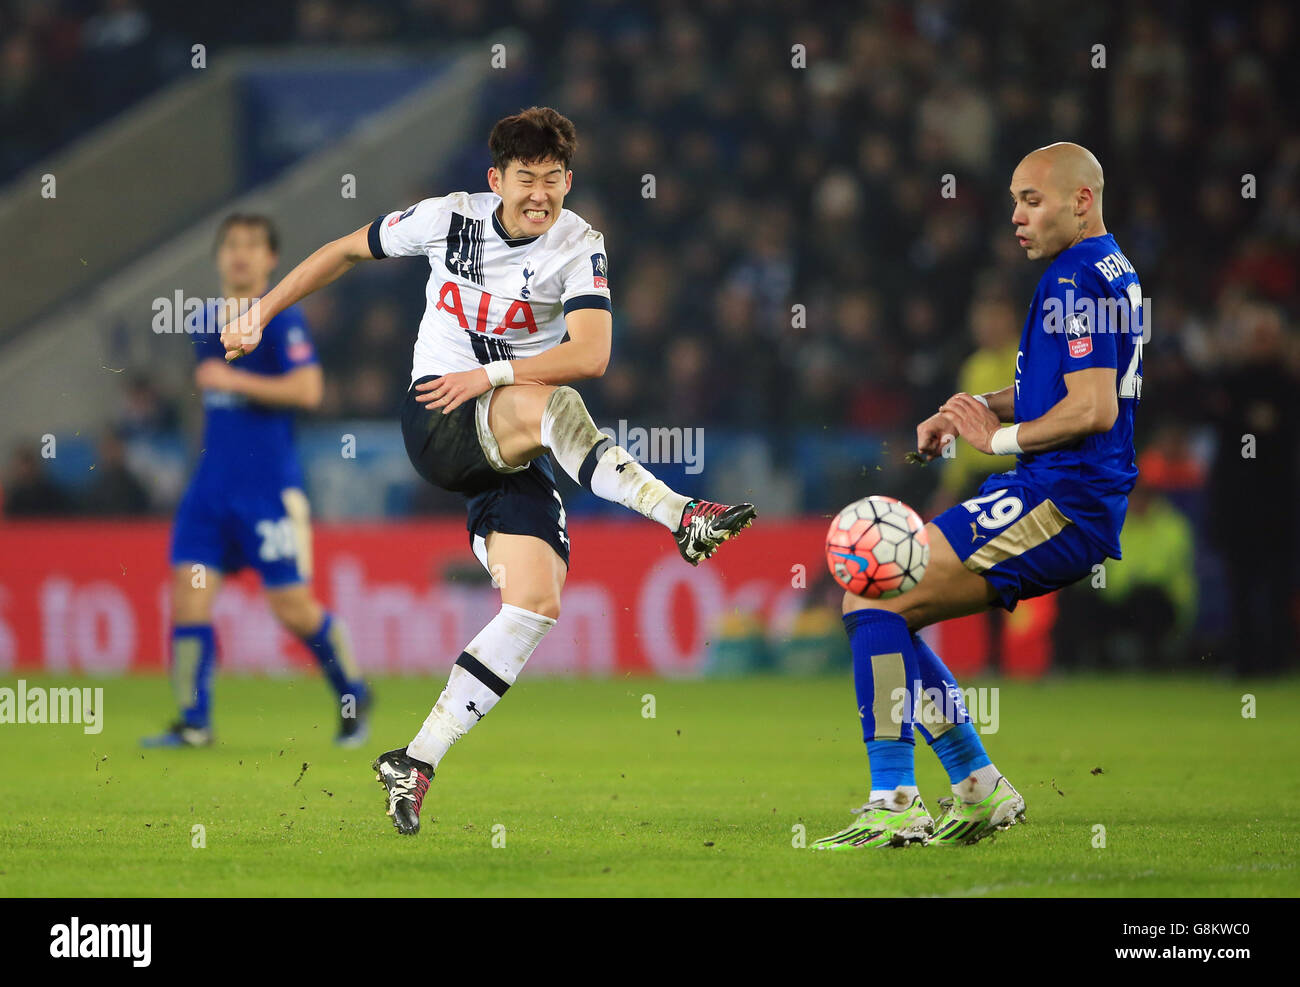 Tottenham Hotspur's Son Heung-Min (left) and Leicester City's Yohan Benalouane battle for the ball during the Emirates FA Cup, third round match at the King Power Stadium, Leicester. Stock Photo